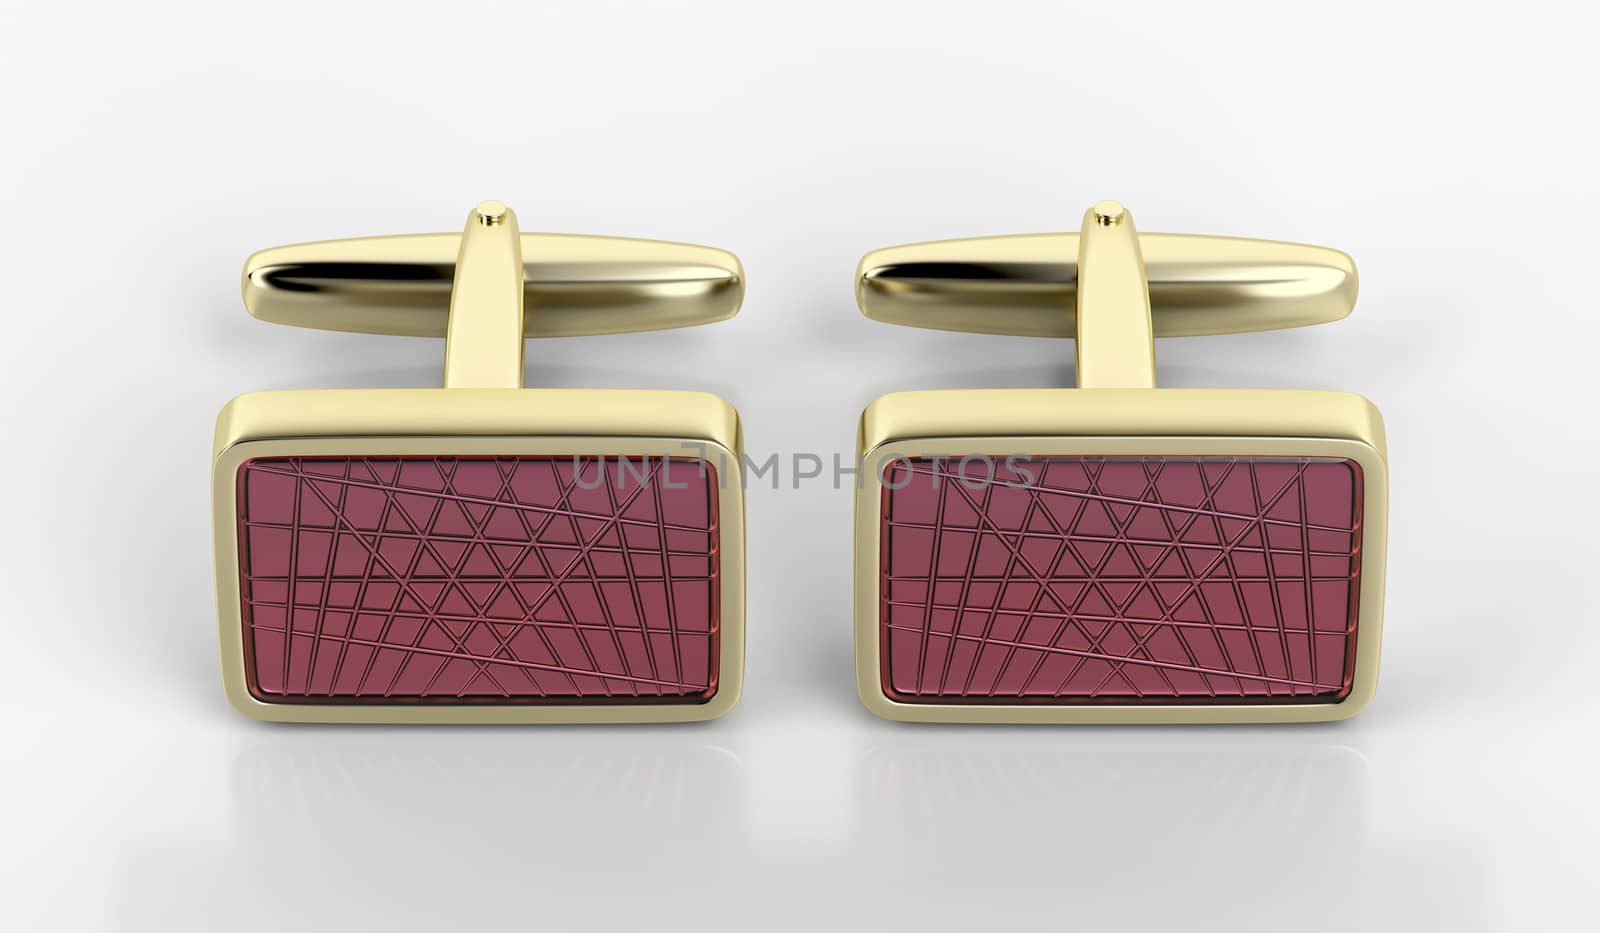 Golden cufflinks by magraphics